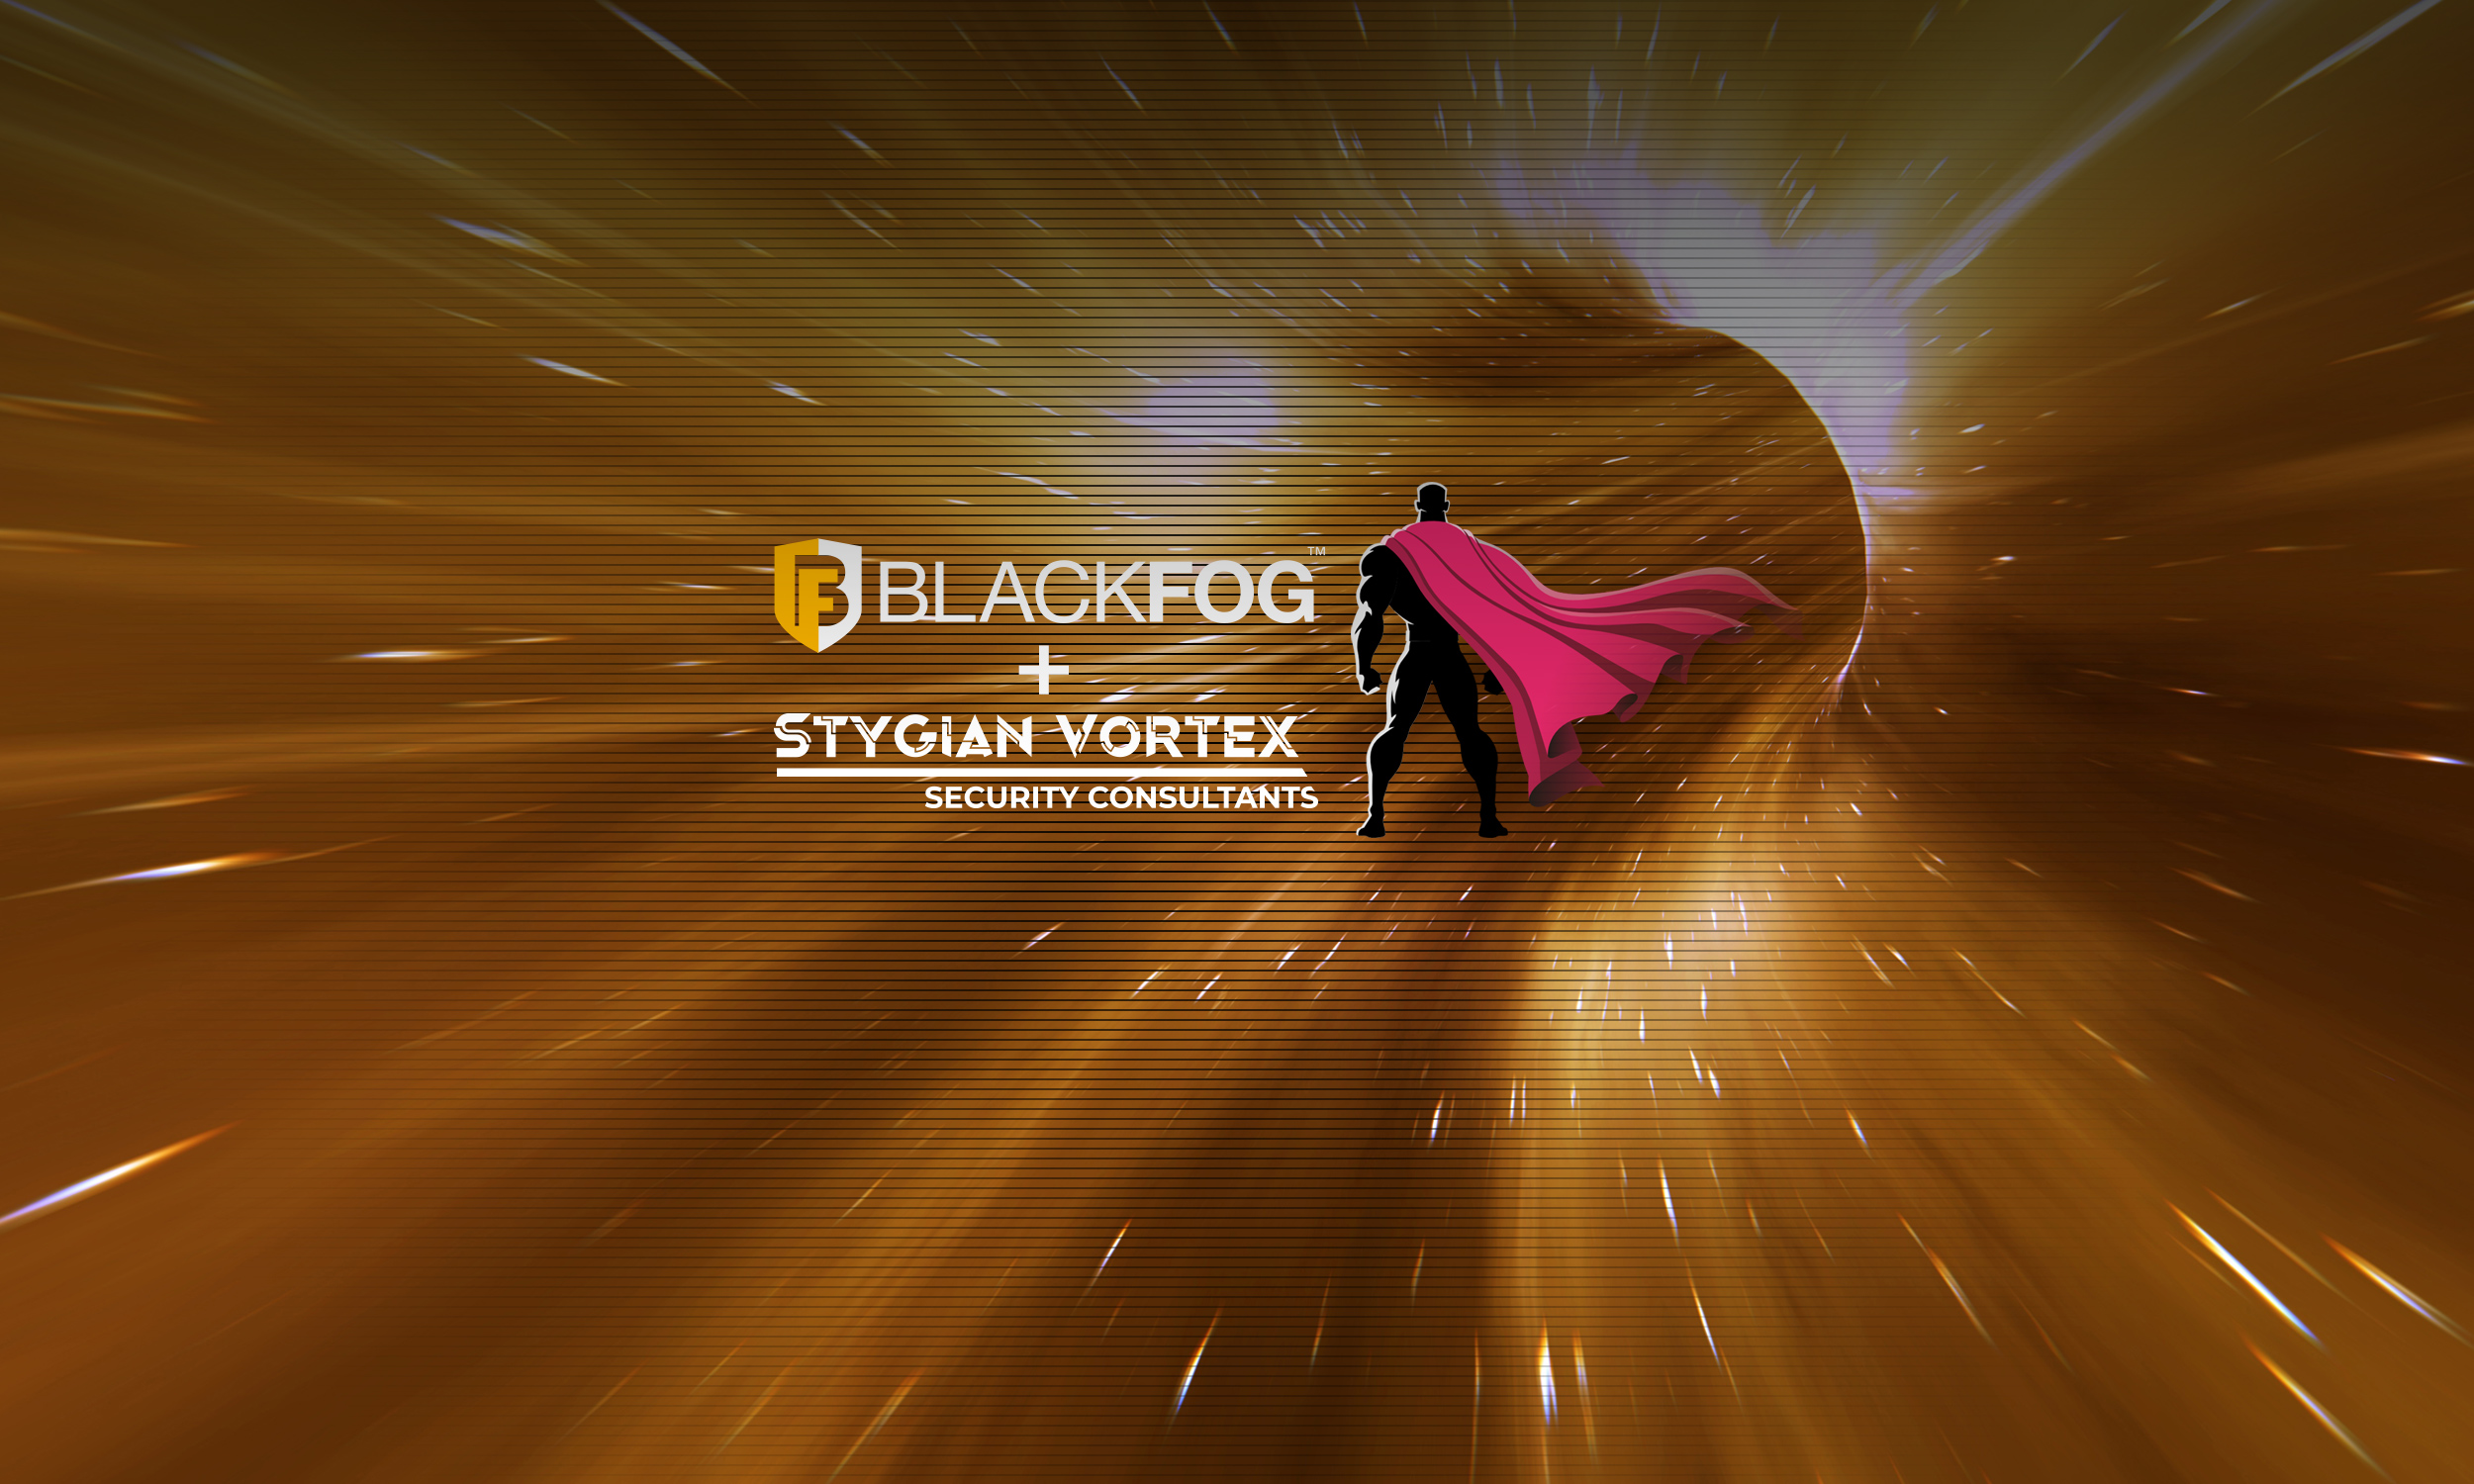 The Stygian Vortex + BlackFog partnership brings you a way to reduce your risk against ransomware